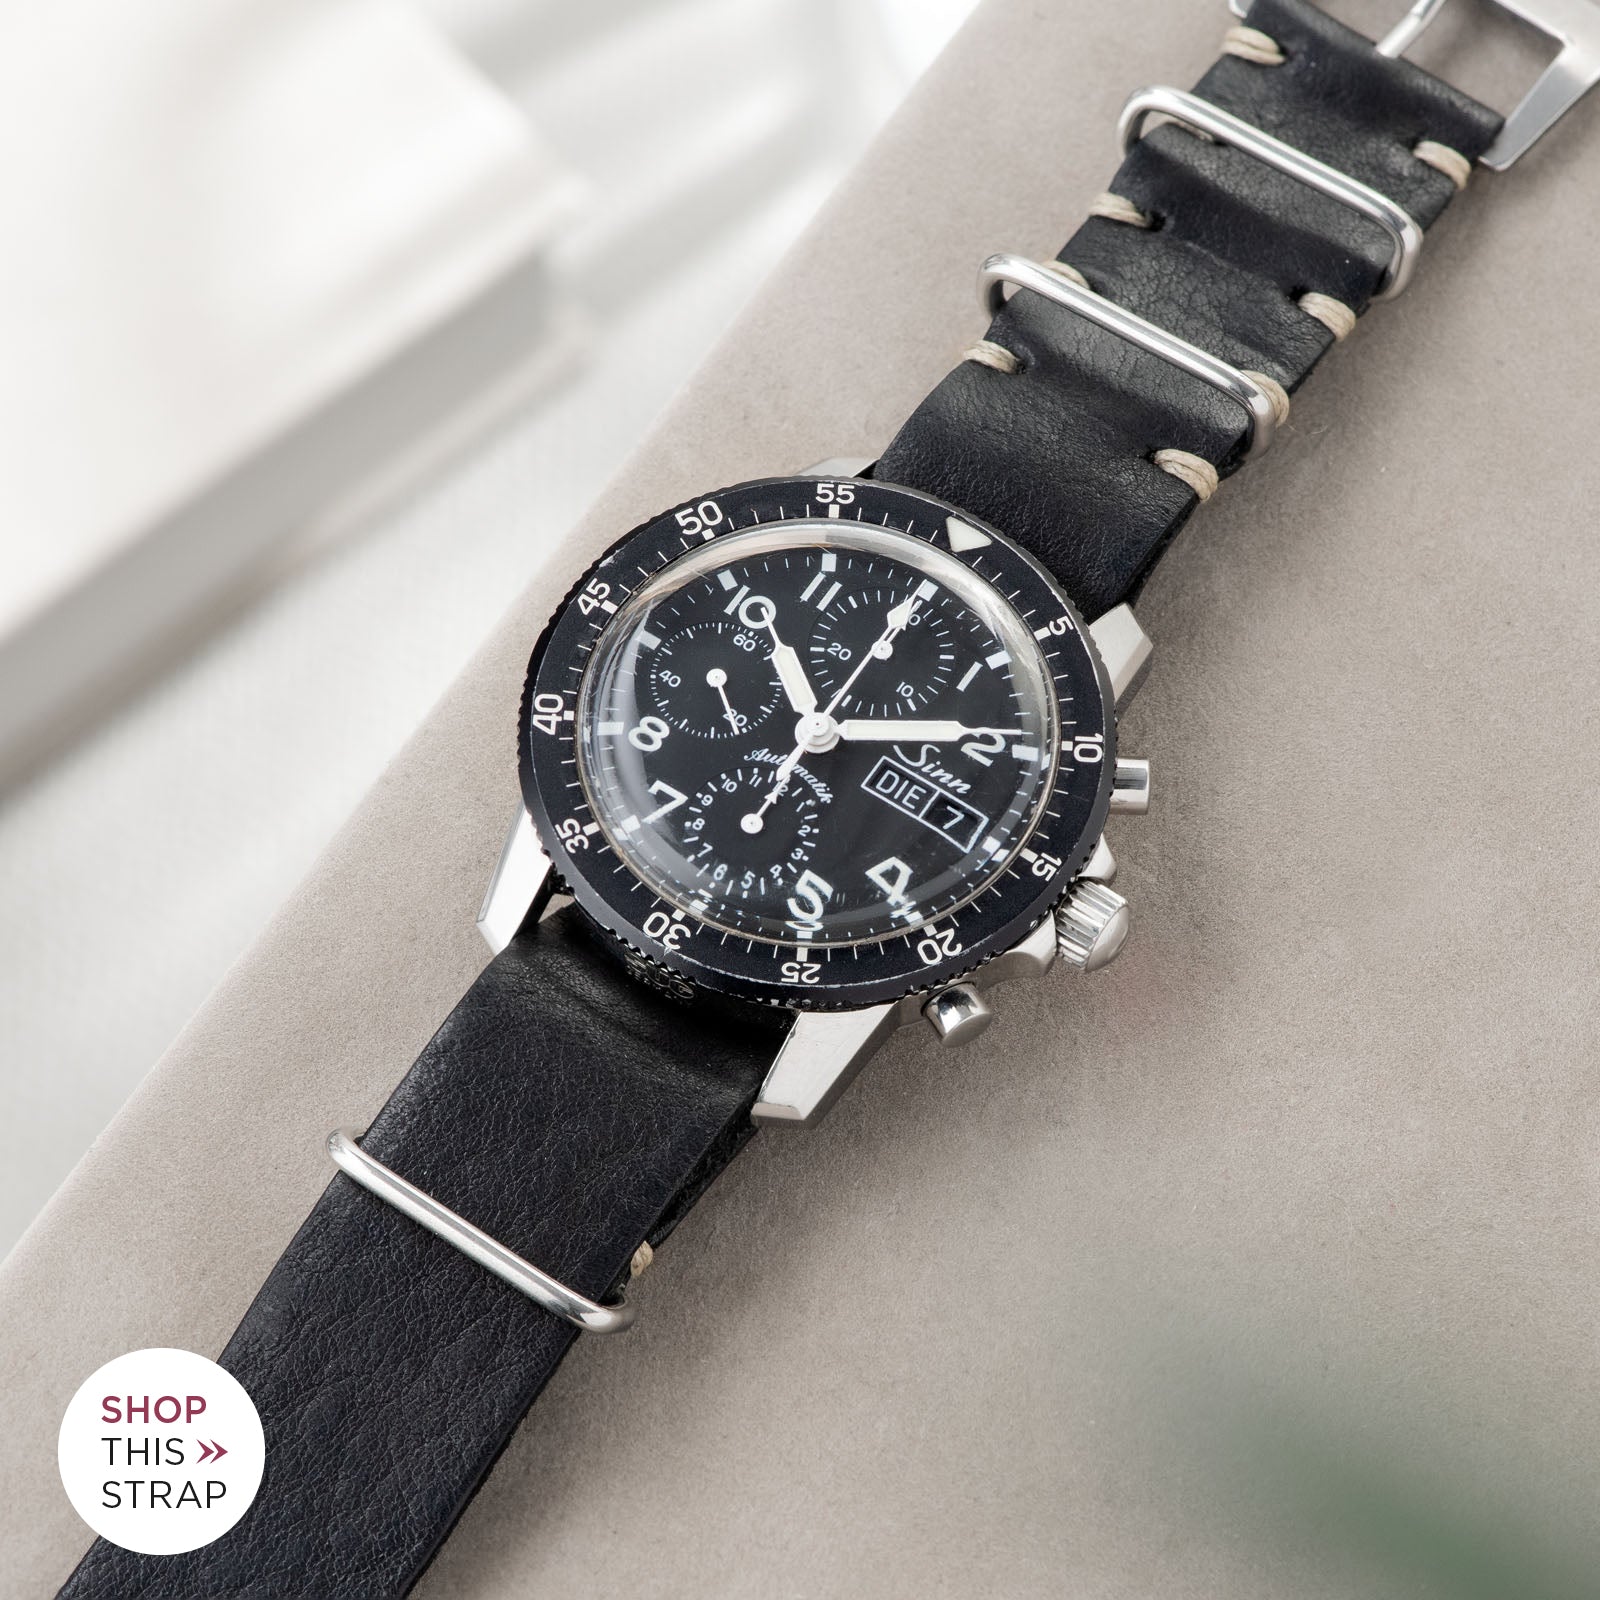 Bulang and Sons_Strap Guide_Sinn 103St Flieder Chronograph_Black Nato Leather Watch Strap